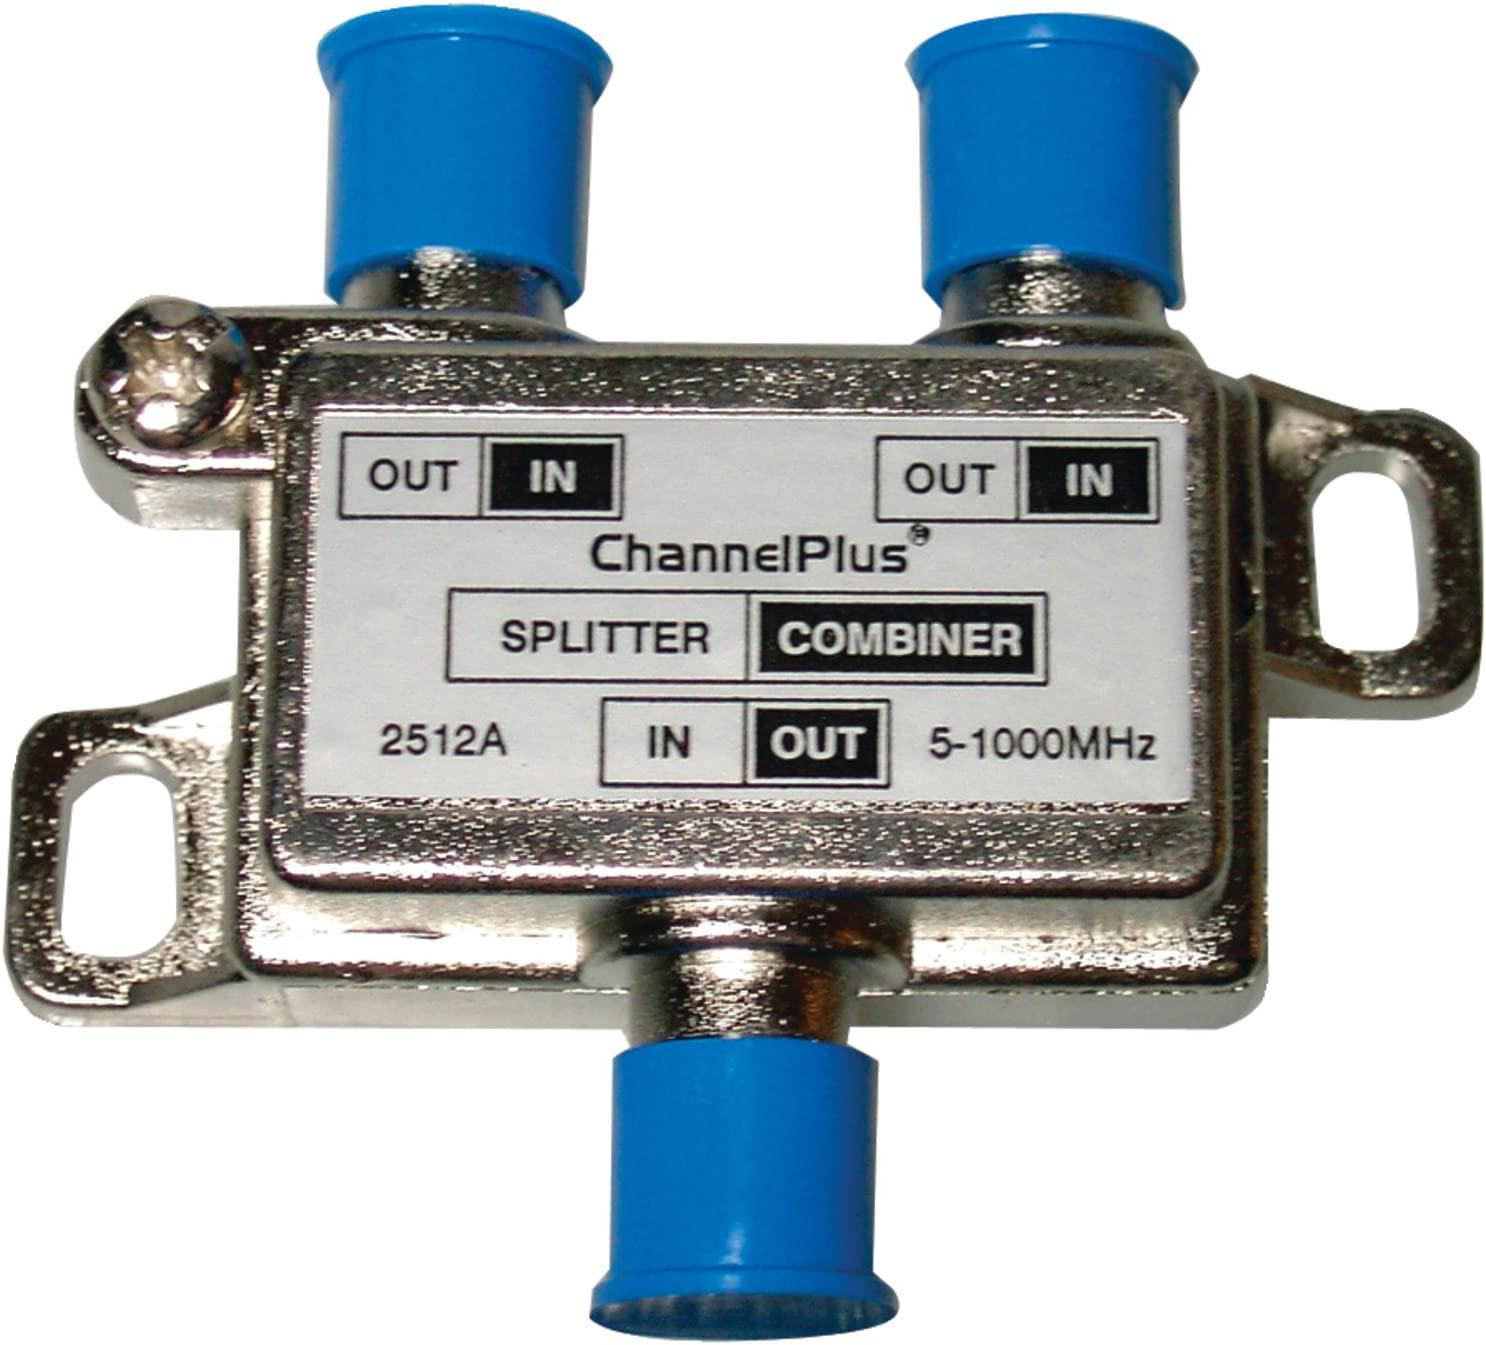 ChannelPlus, Linear 2512 ChannelPlus DC and IR Passing 2-Way Splitter/Combiner